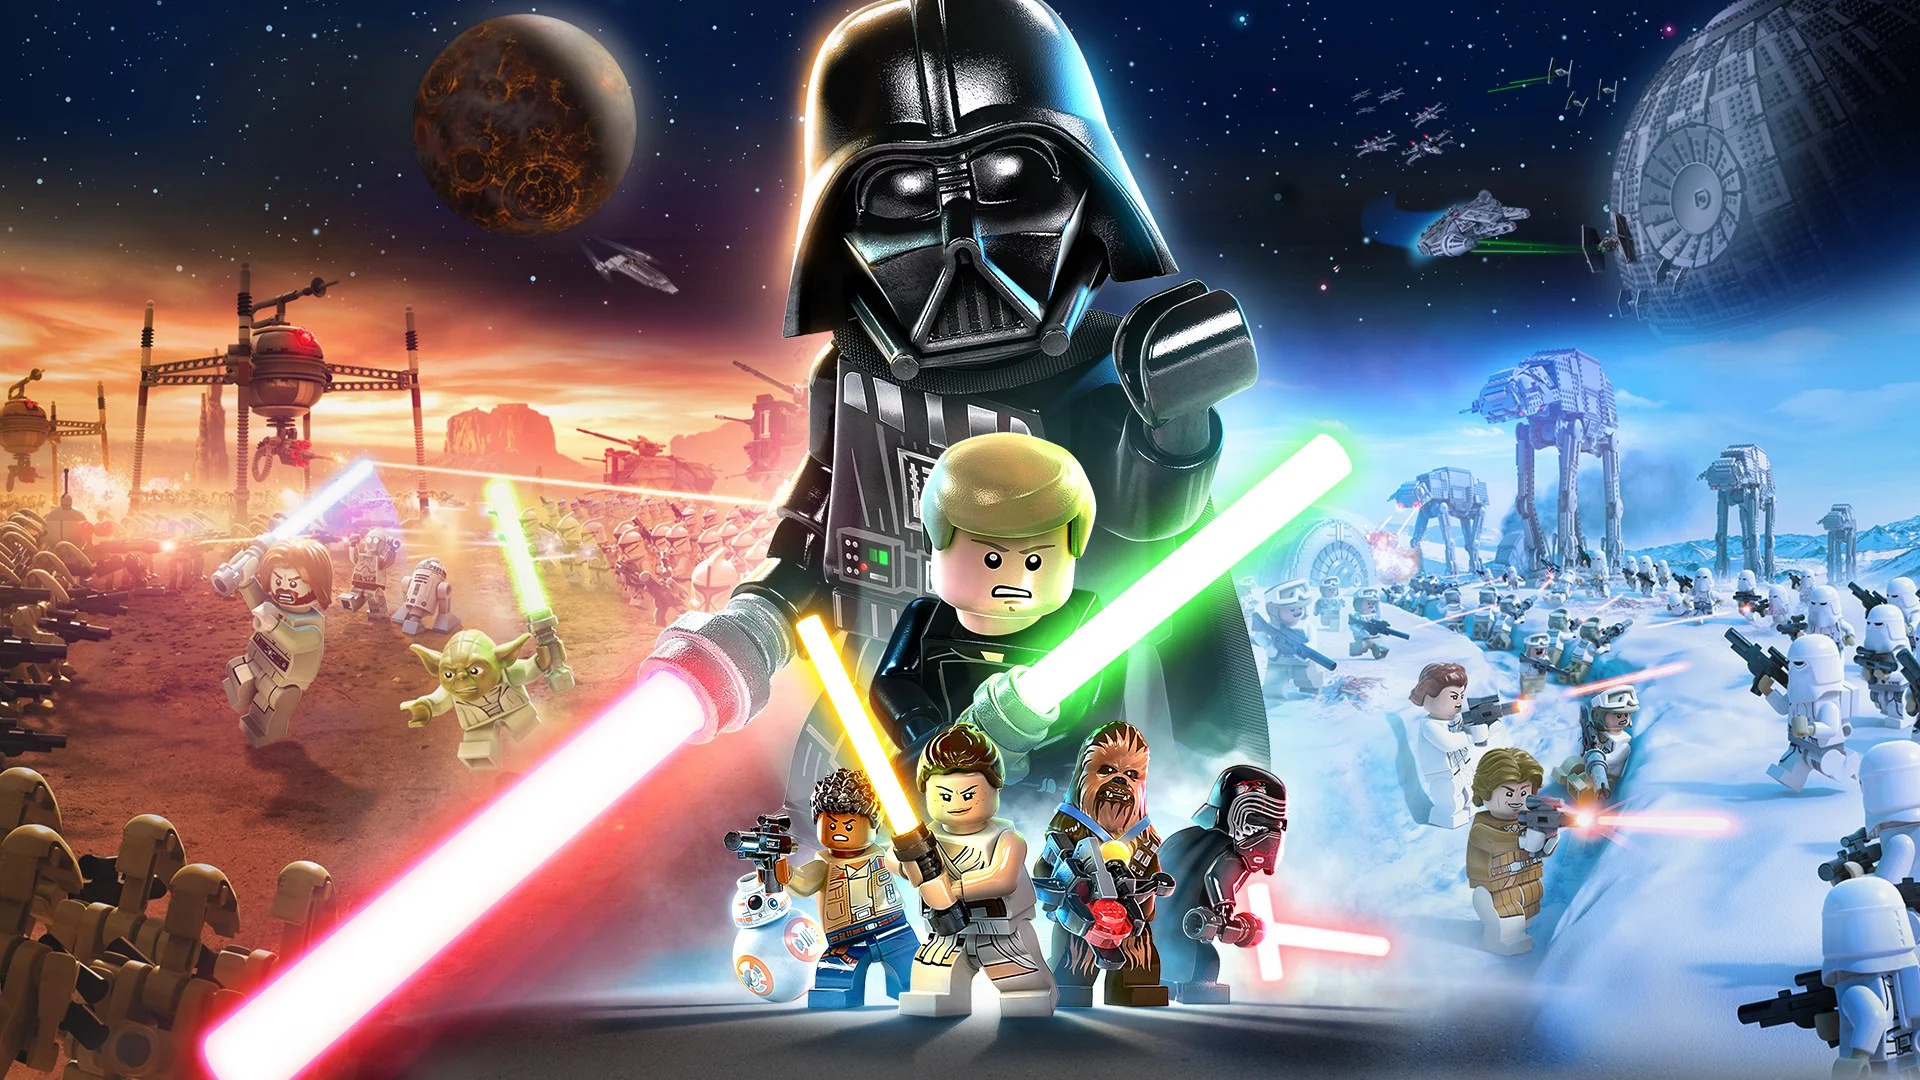 Wars: The Skywalker Deluxe Edition Available at GameStop - The Brick